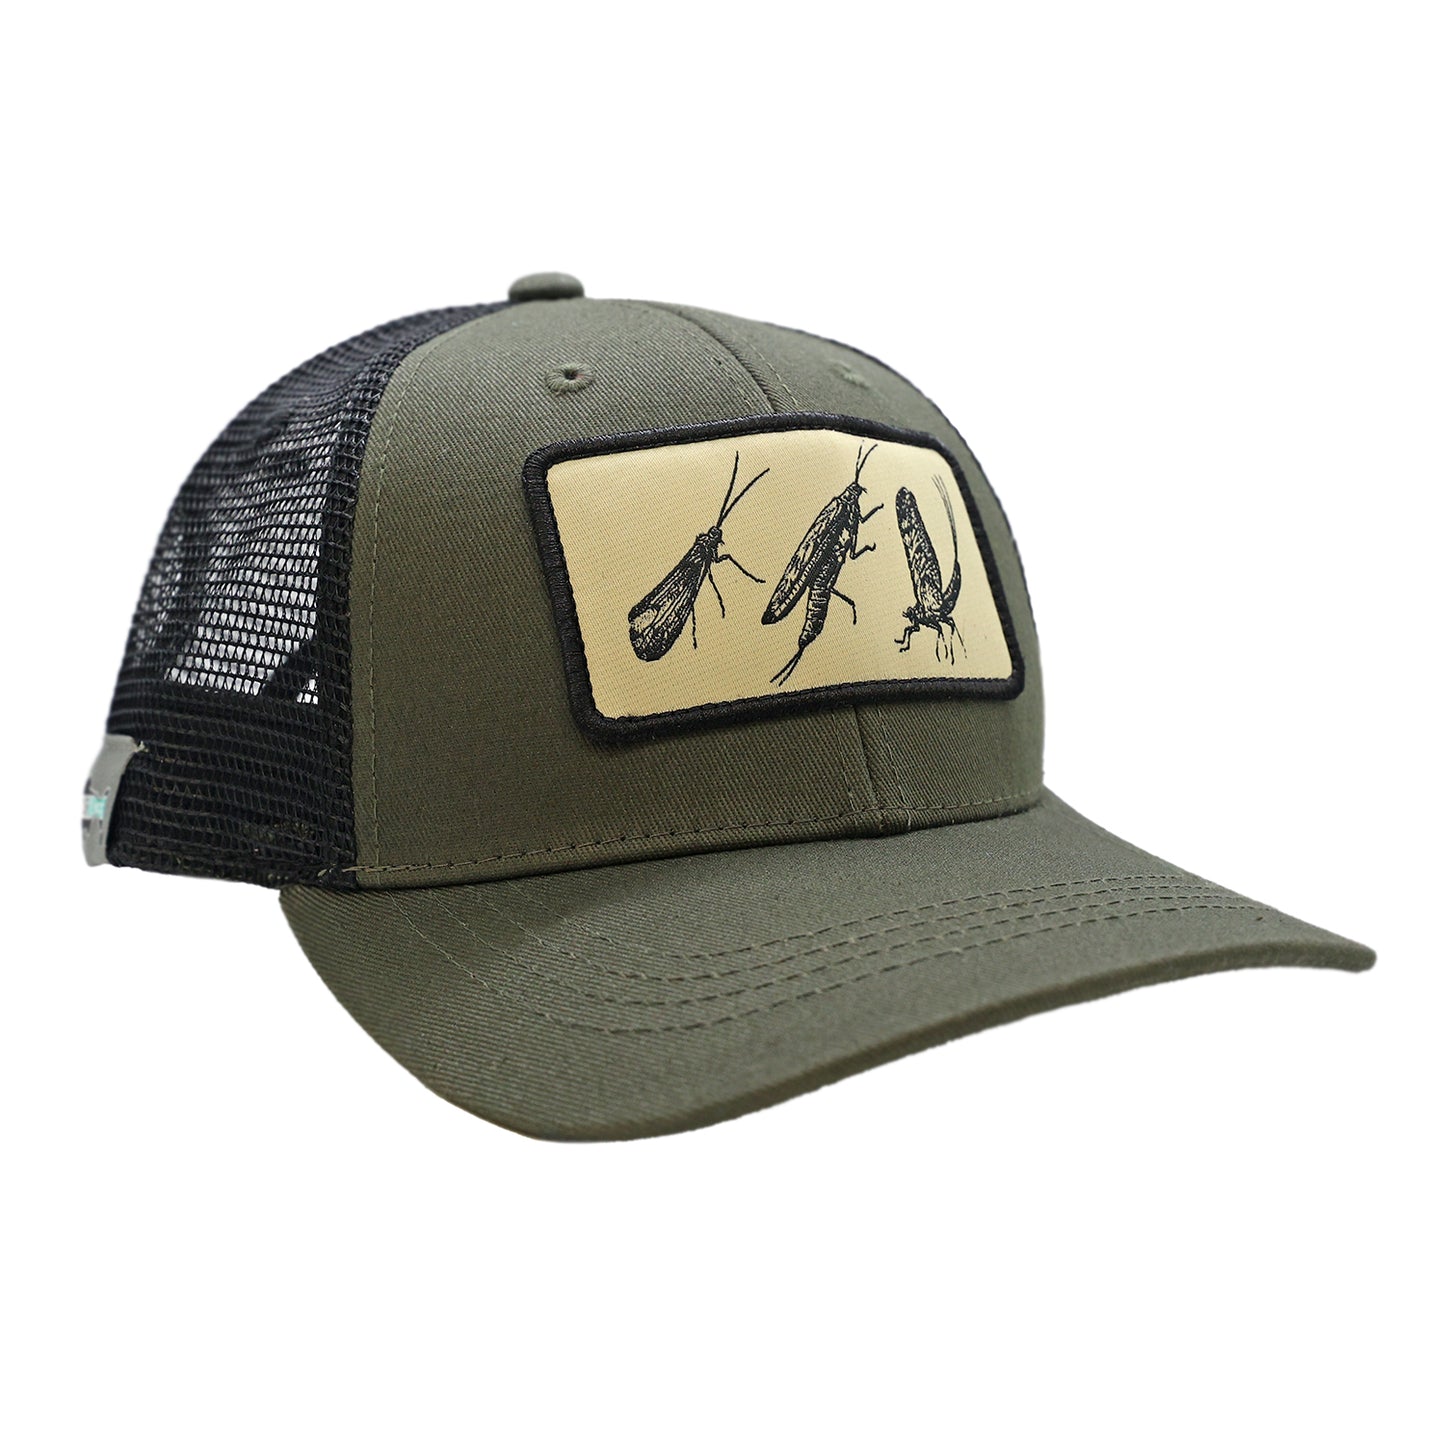 A hat with black mesh back and green front. The front features 3 adult insects in black on a tan background.